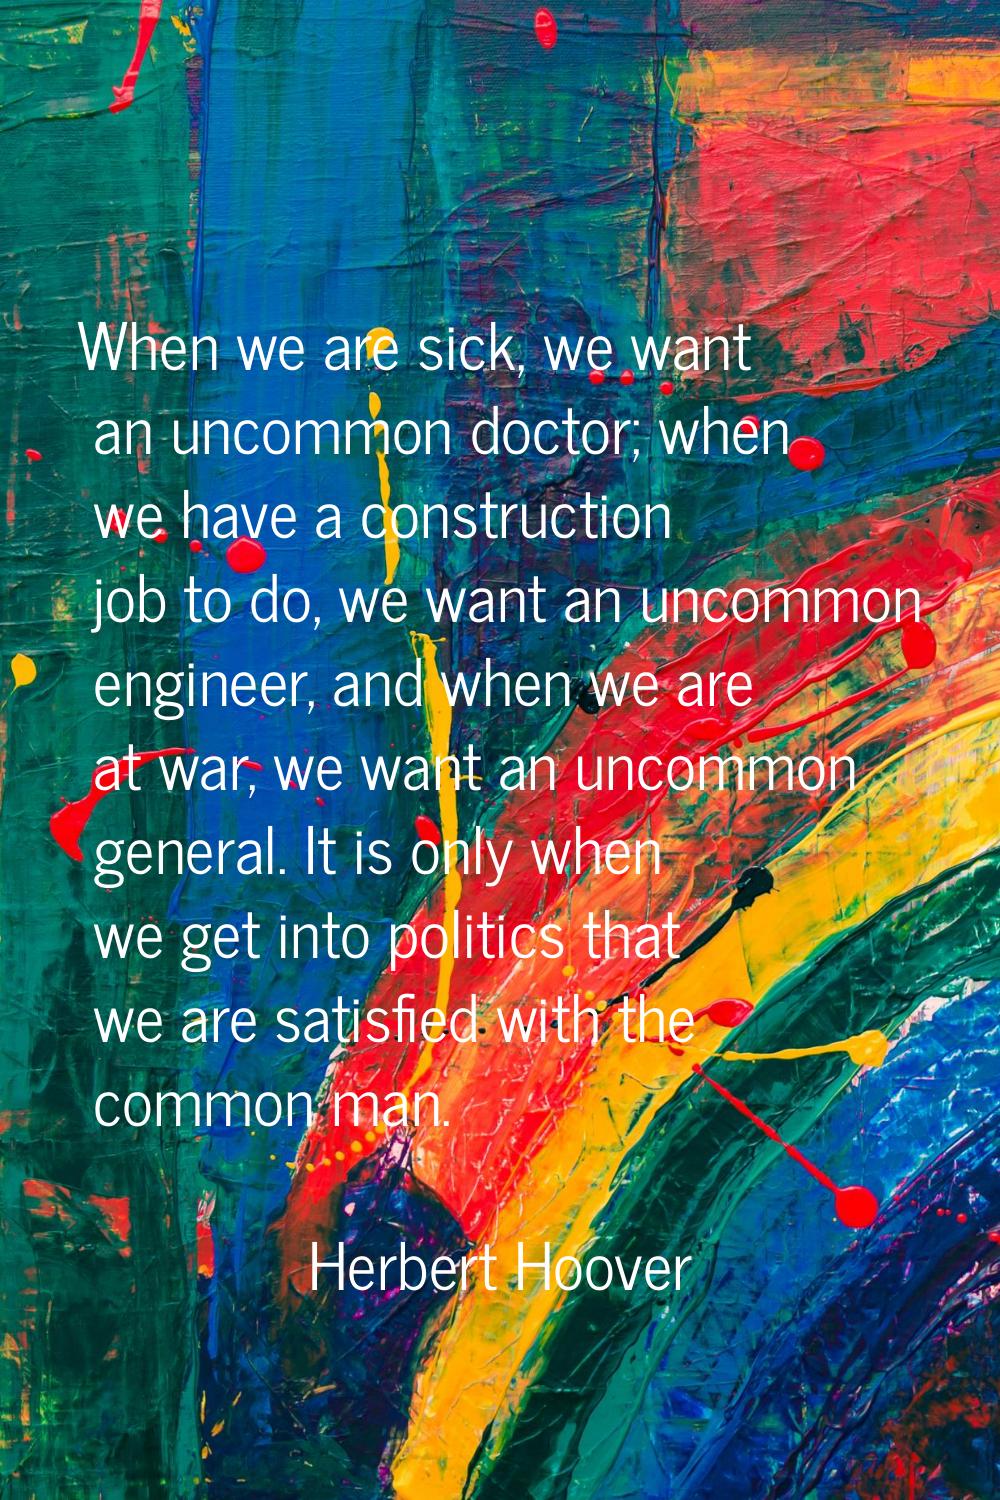 When we are sick, we want an uncommon doctor; when we have a construction job to do, we want an unc